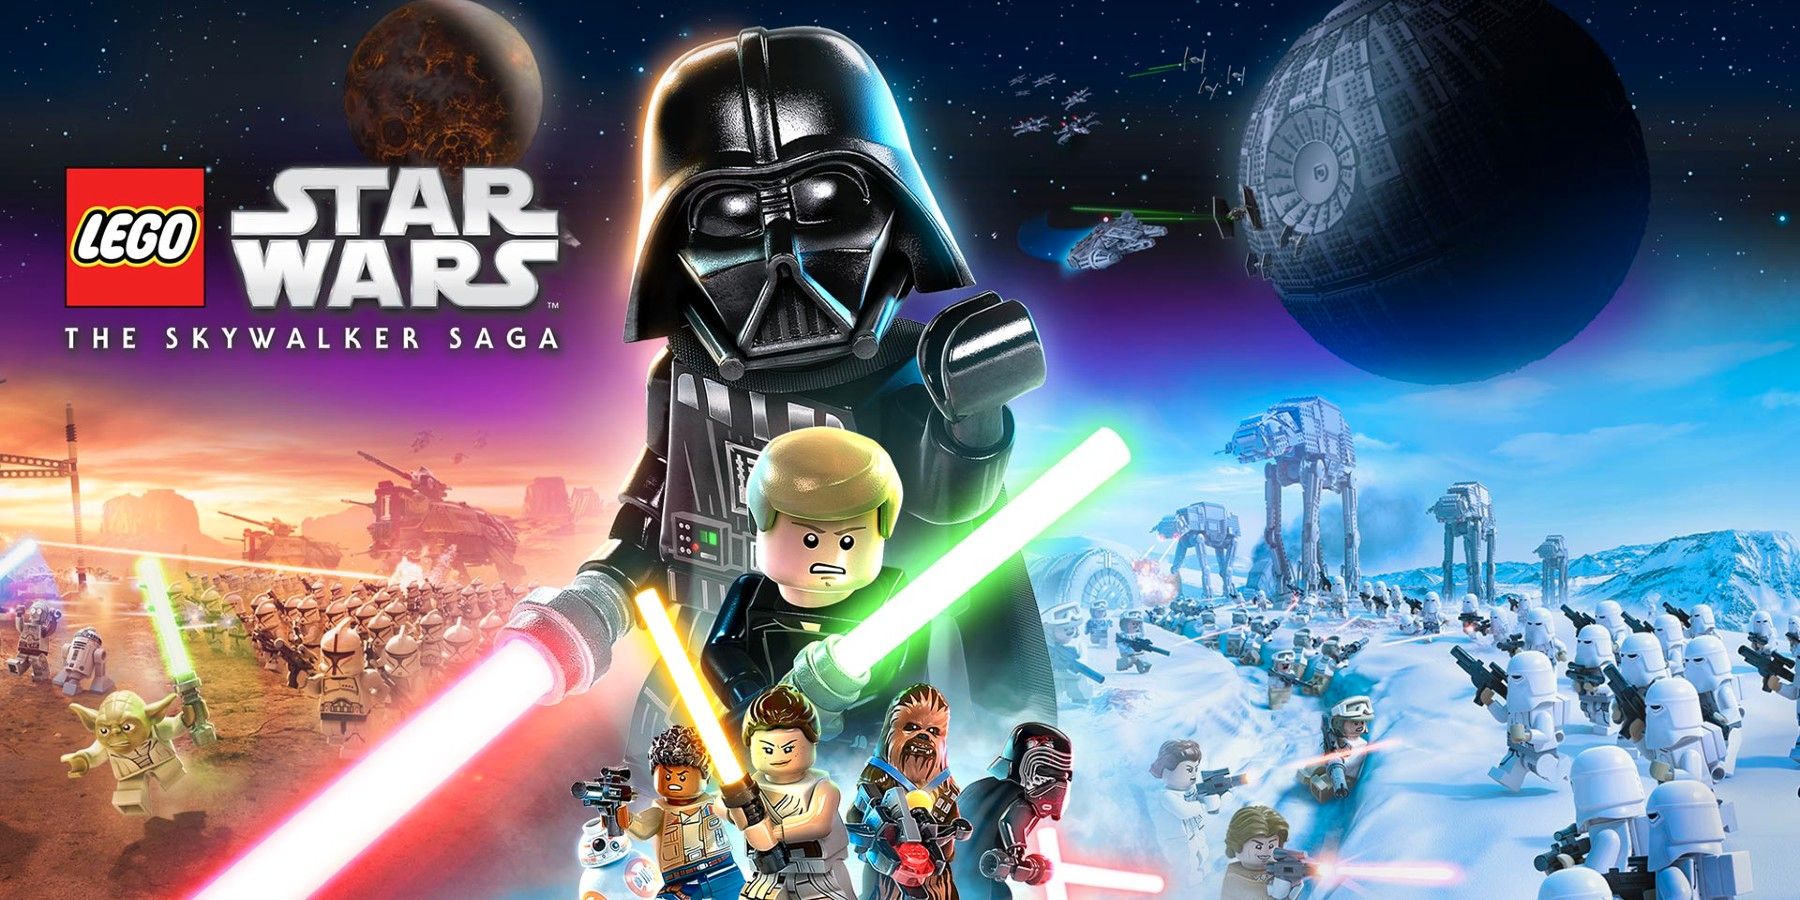 Save Game Locations for Lego Star Wars: The Skywalker Saga